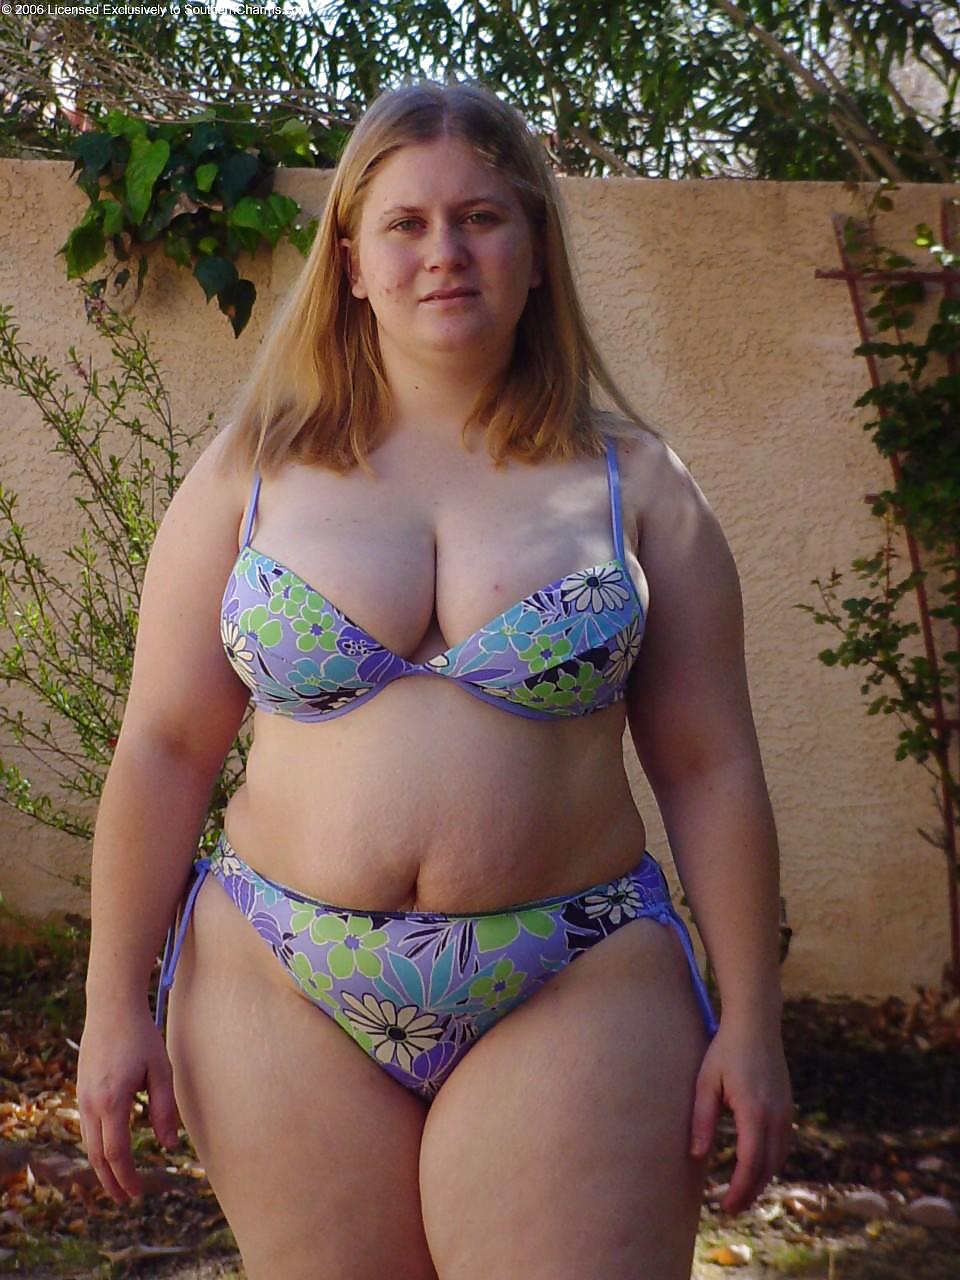 Fat girl swimming suits